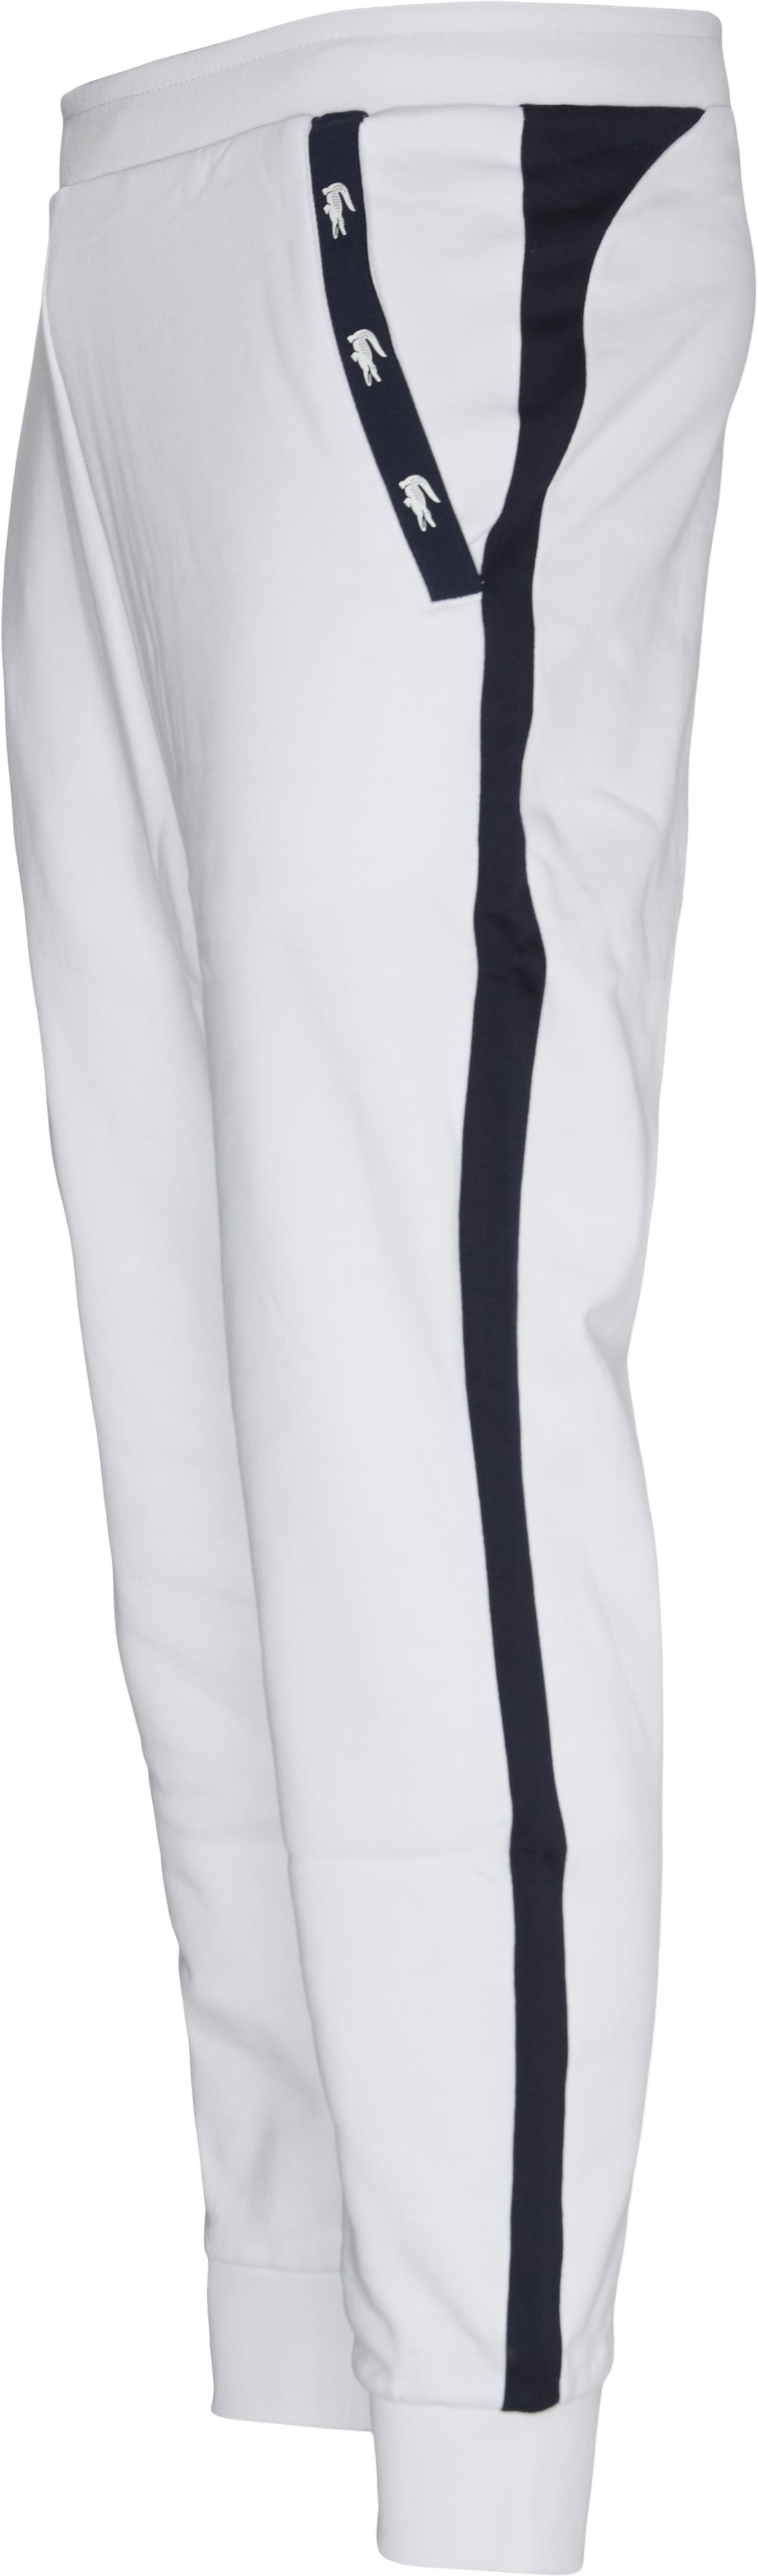 XH5176 Trousers from Lacoste 80